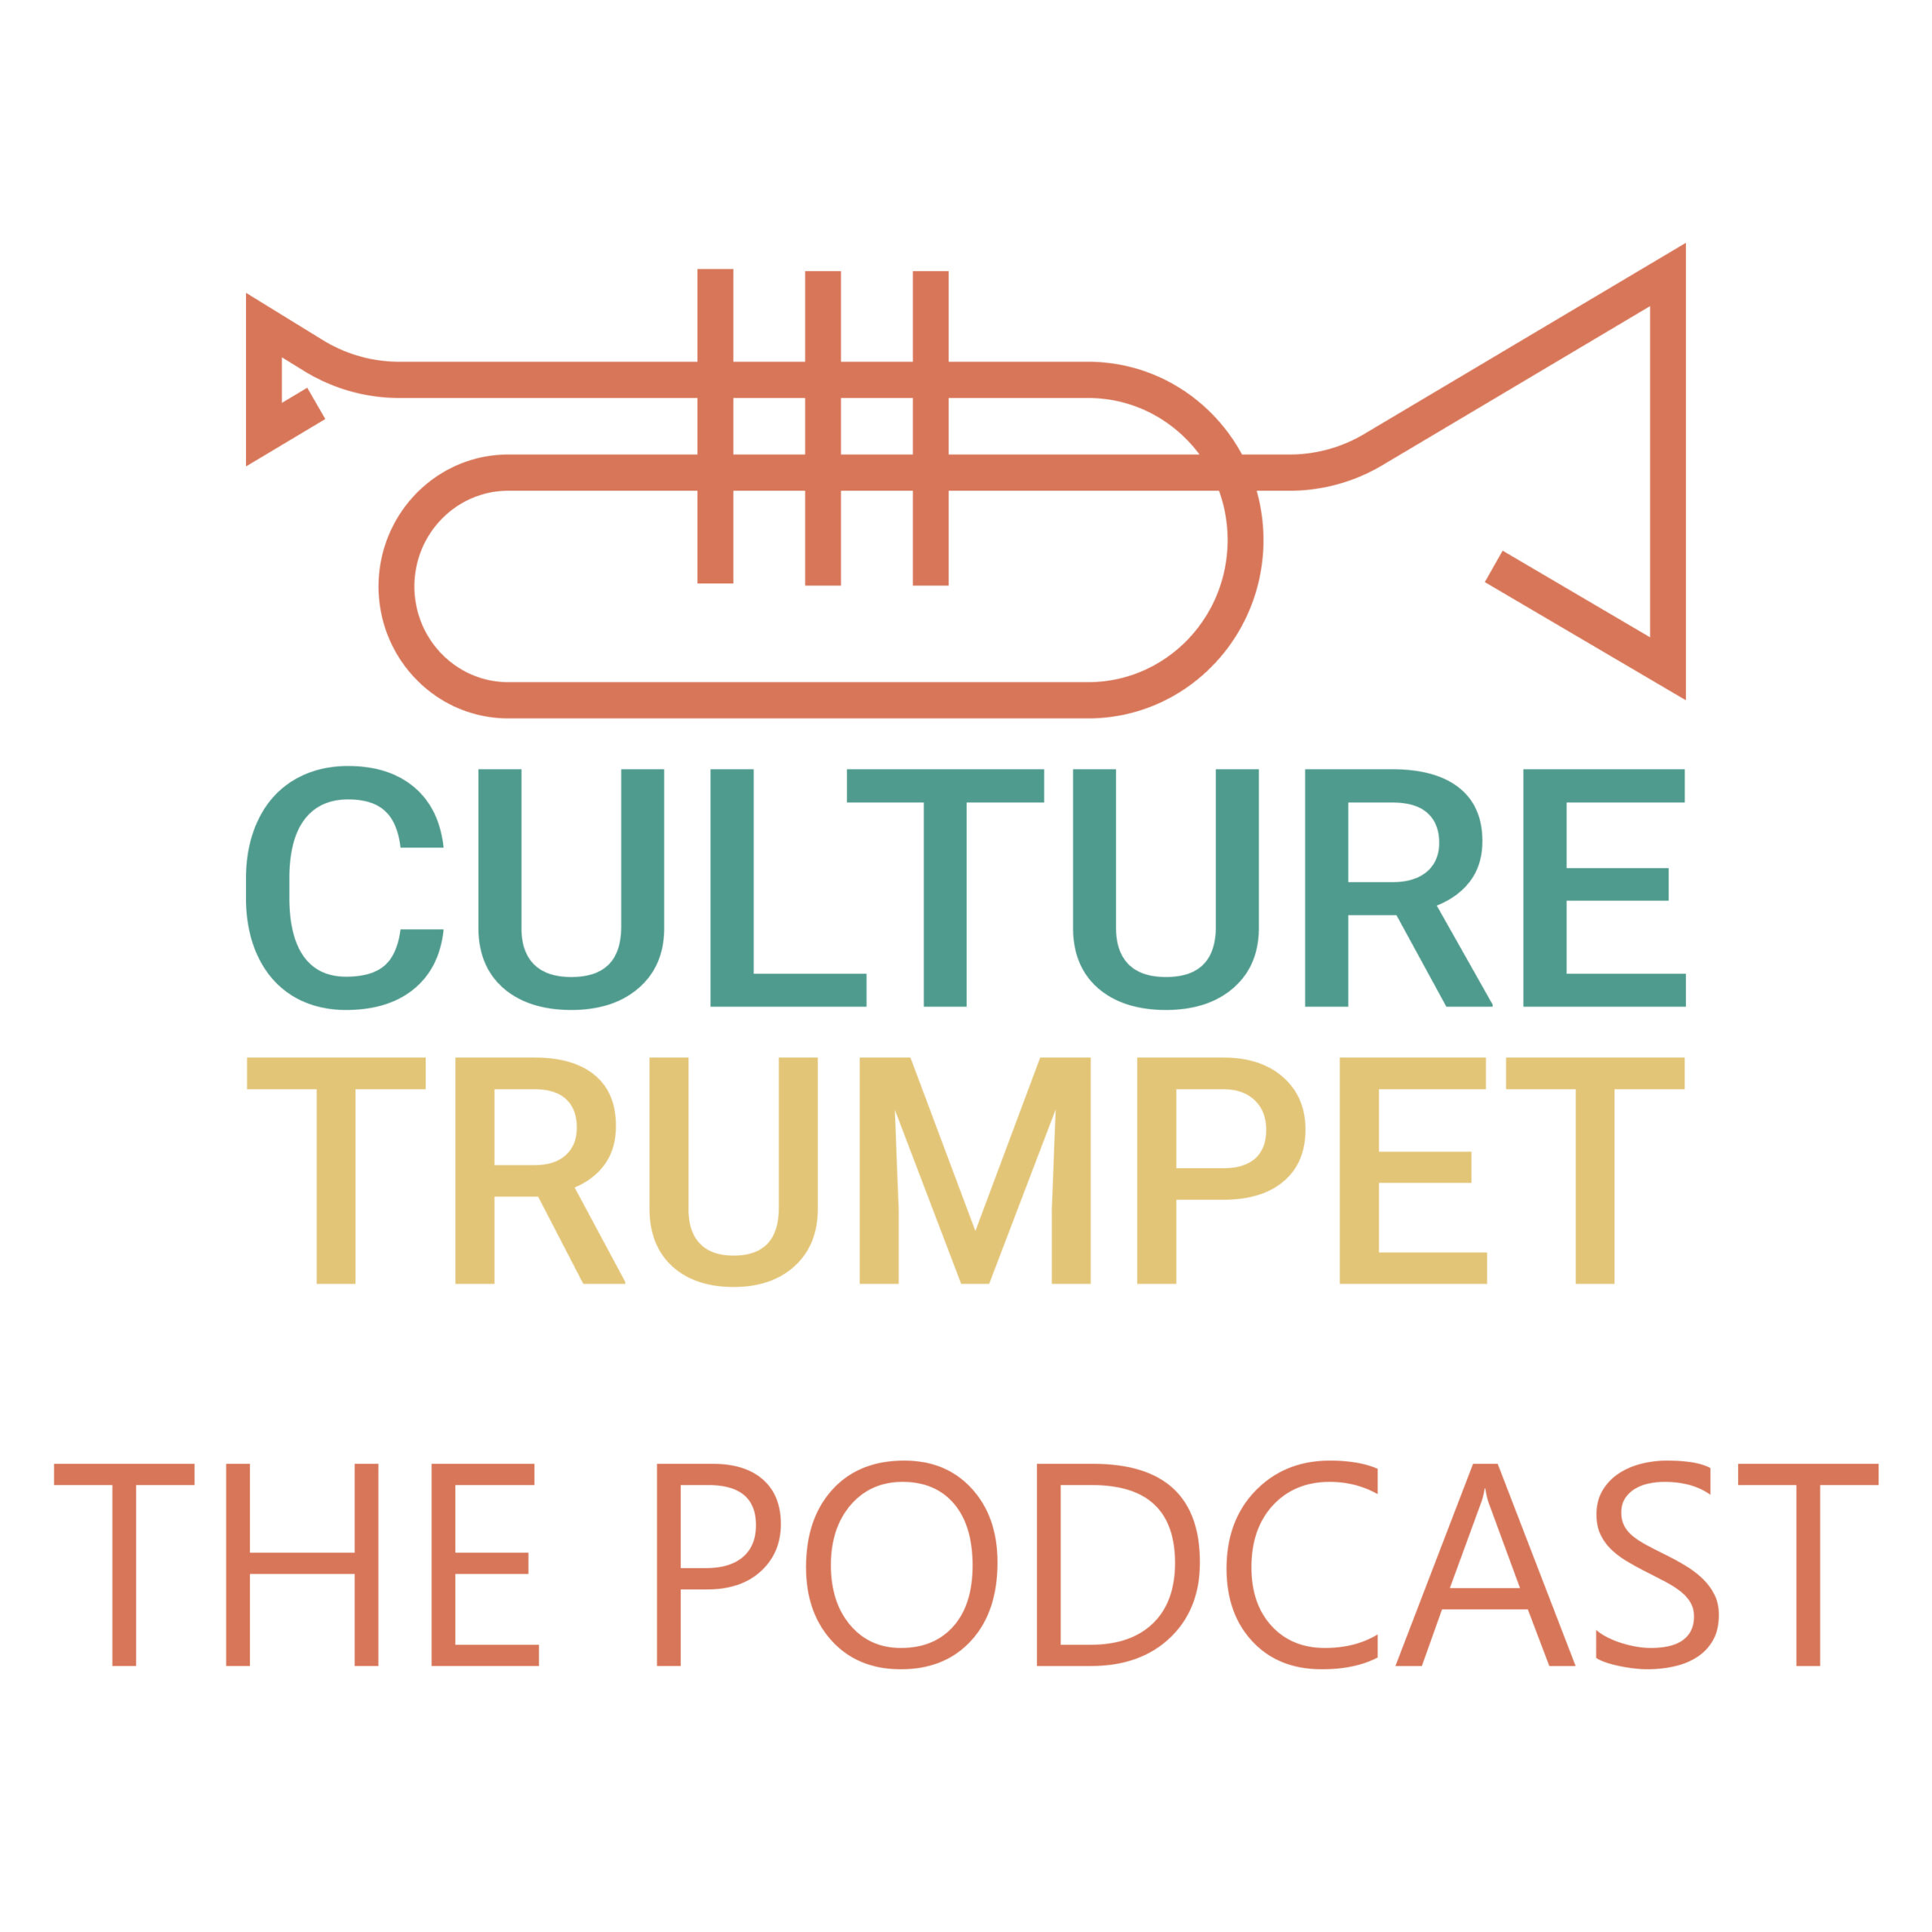 CULTURE TRUMPET - We're back with our first proper podcast episode ...